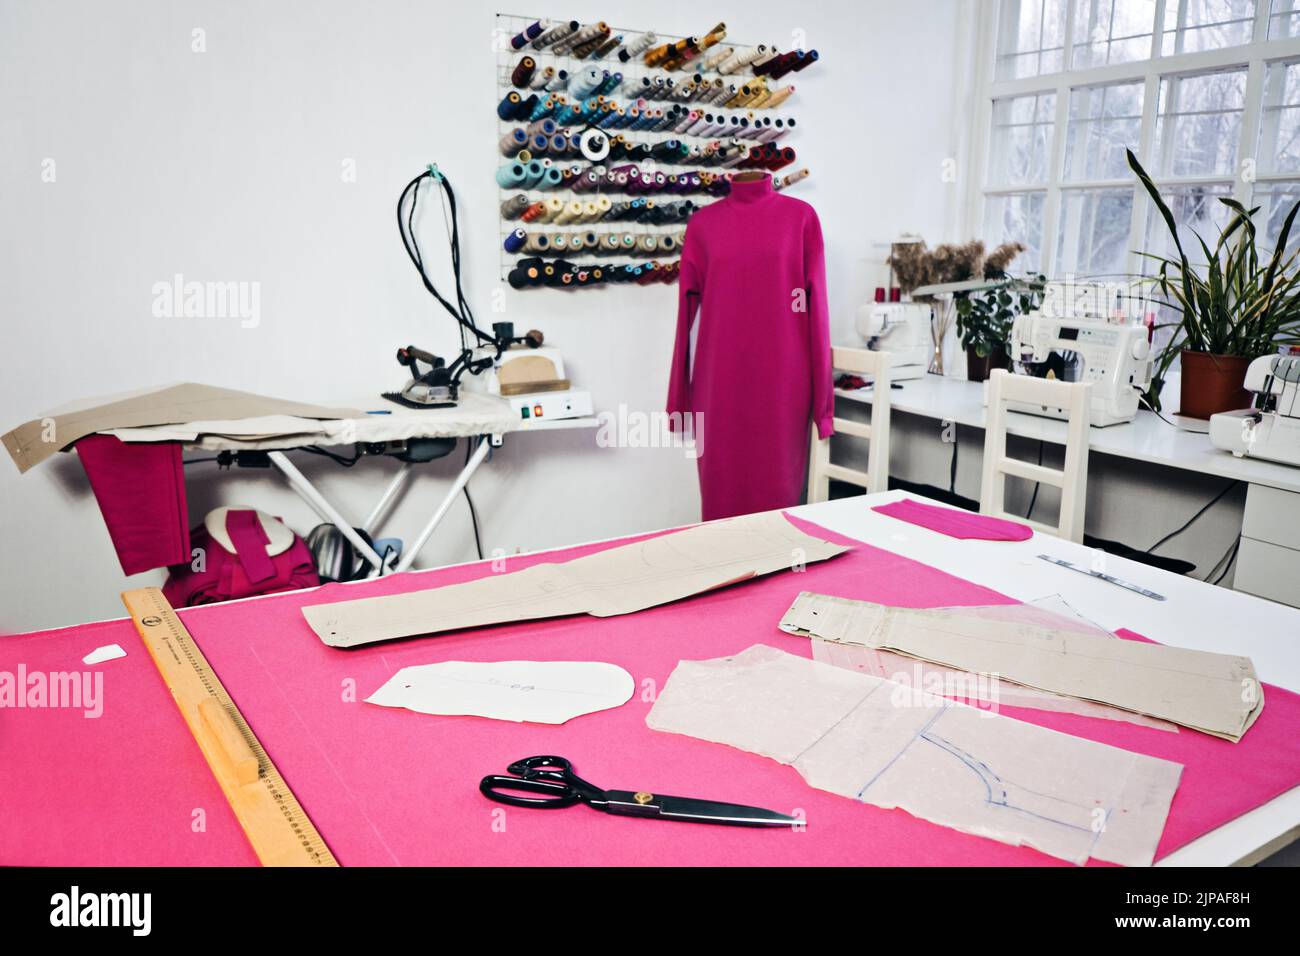 Fashion designer working studio interior with workplace table, fabric  materials and sewing patterns for clothes designing, tailoring. Atelier  workshop space. Small business and self employment concept Stock Photo